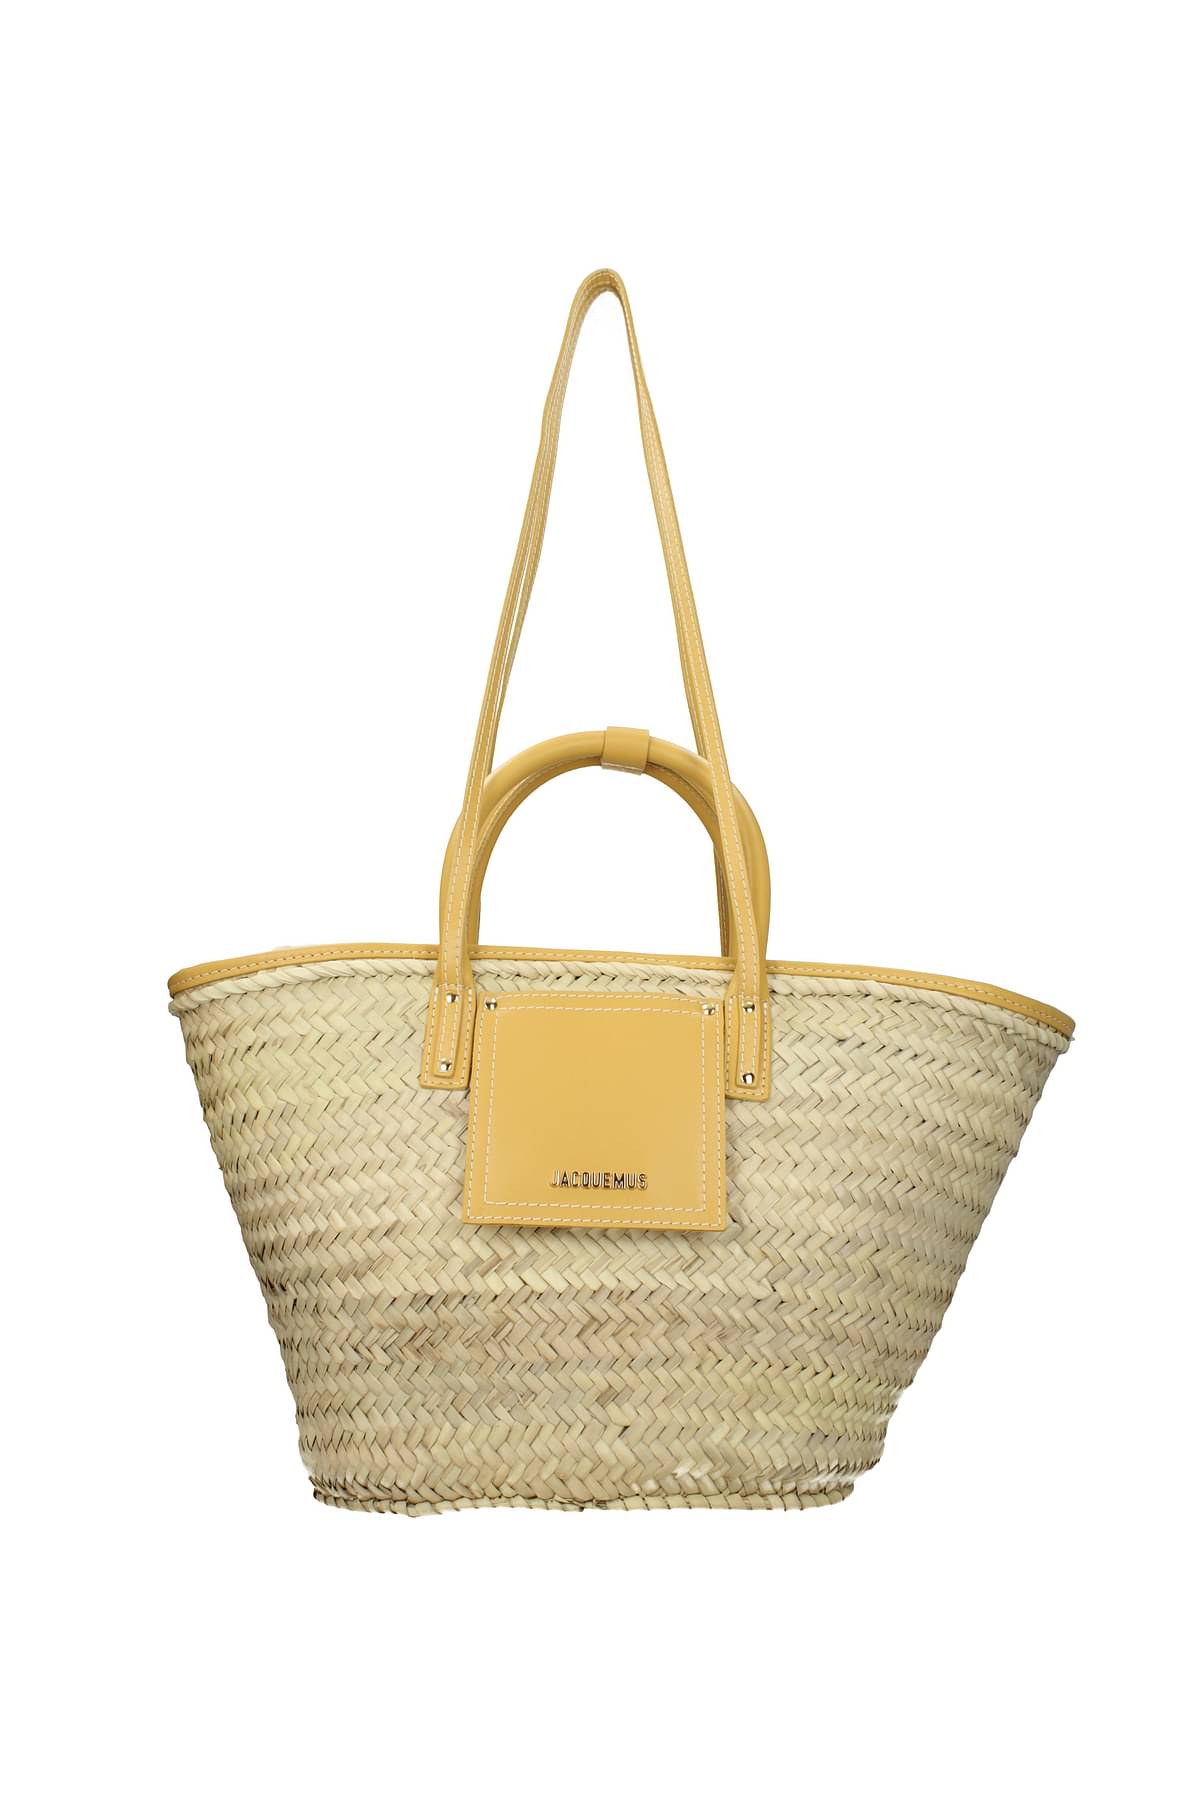 Jacquemus Le Panier Soli Straw & Leather Tote in Green